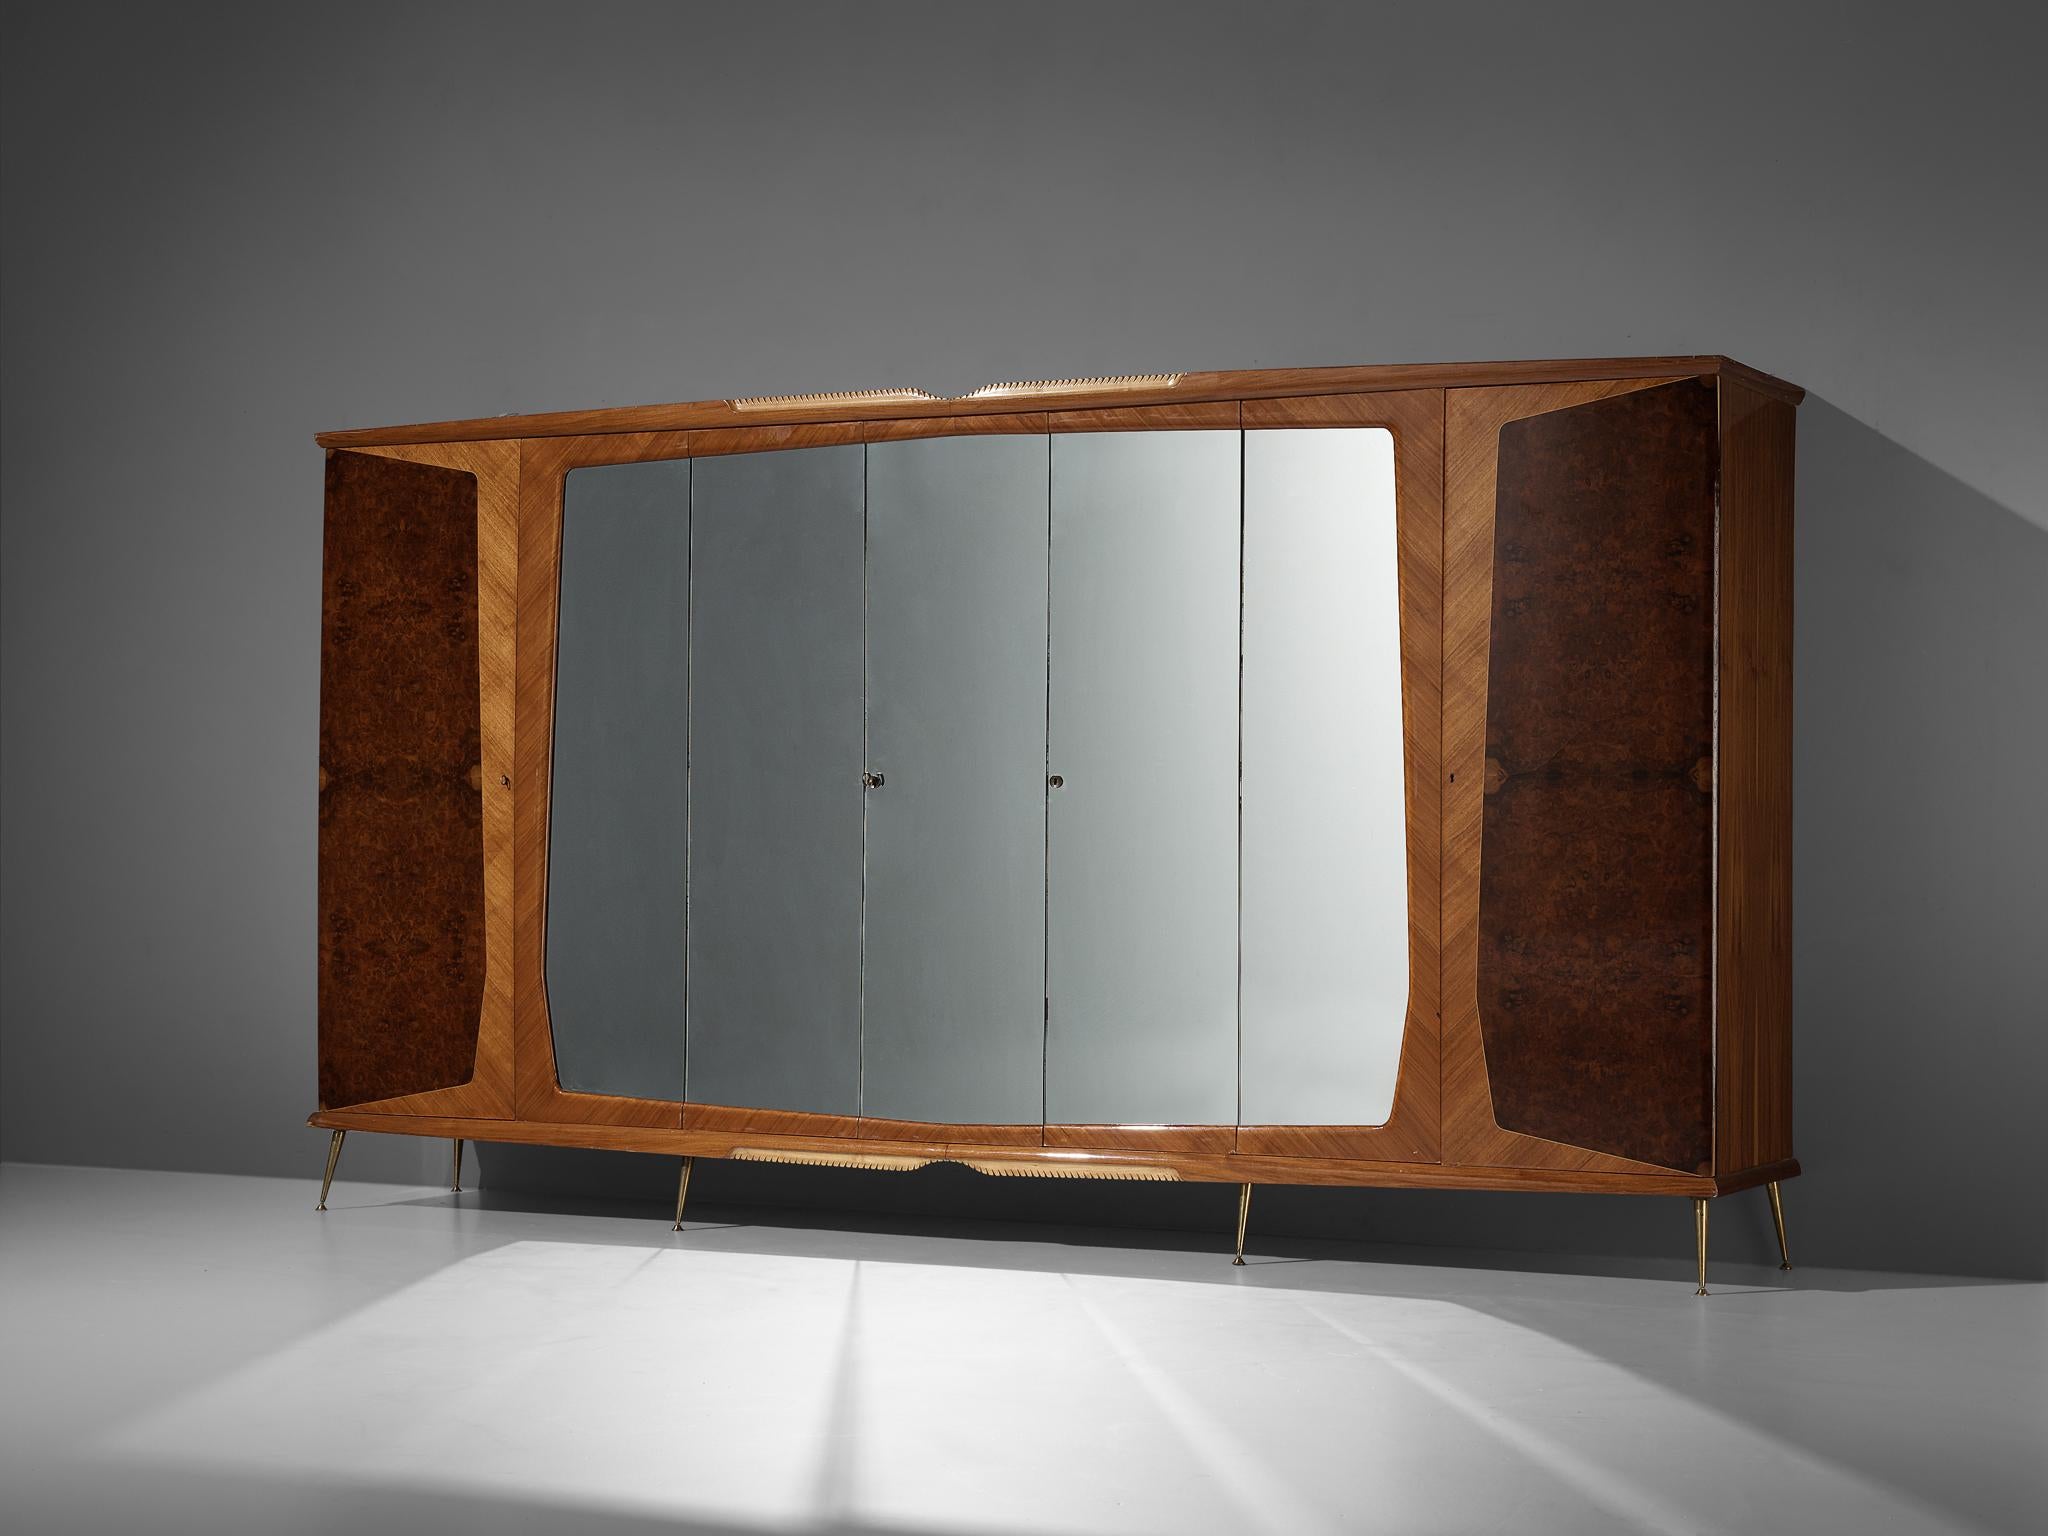 Large Italian wardrobe, mahogany, walnut burl, glass, brass, Italy, 1950s

With its seven doors this wardrobe has an impressive size. Five doors hold a mirrored surface, the two outer doors show luxourious walnut burl in combination with mahogany